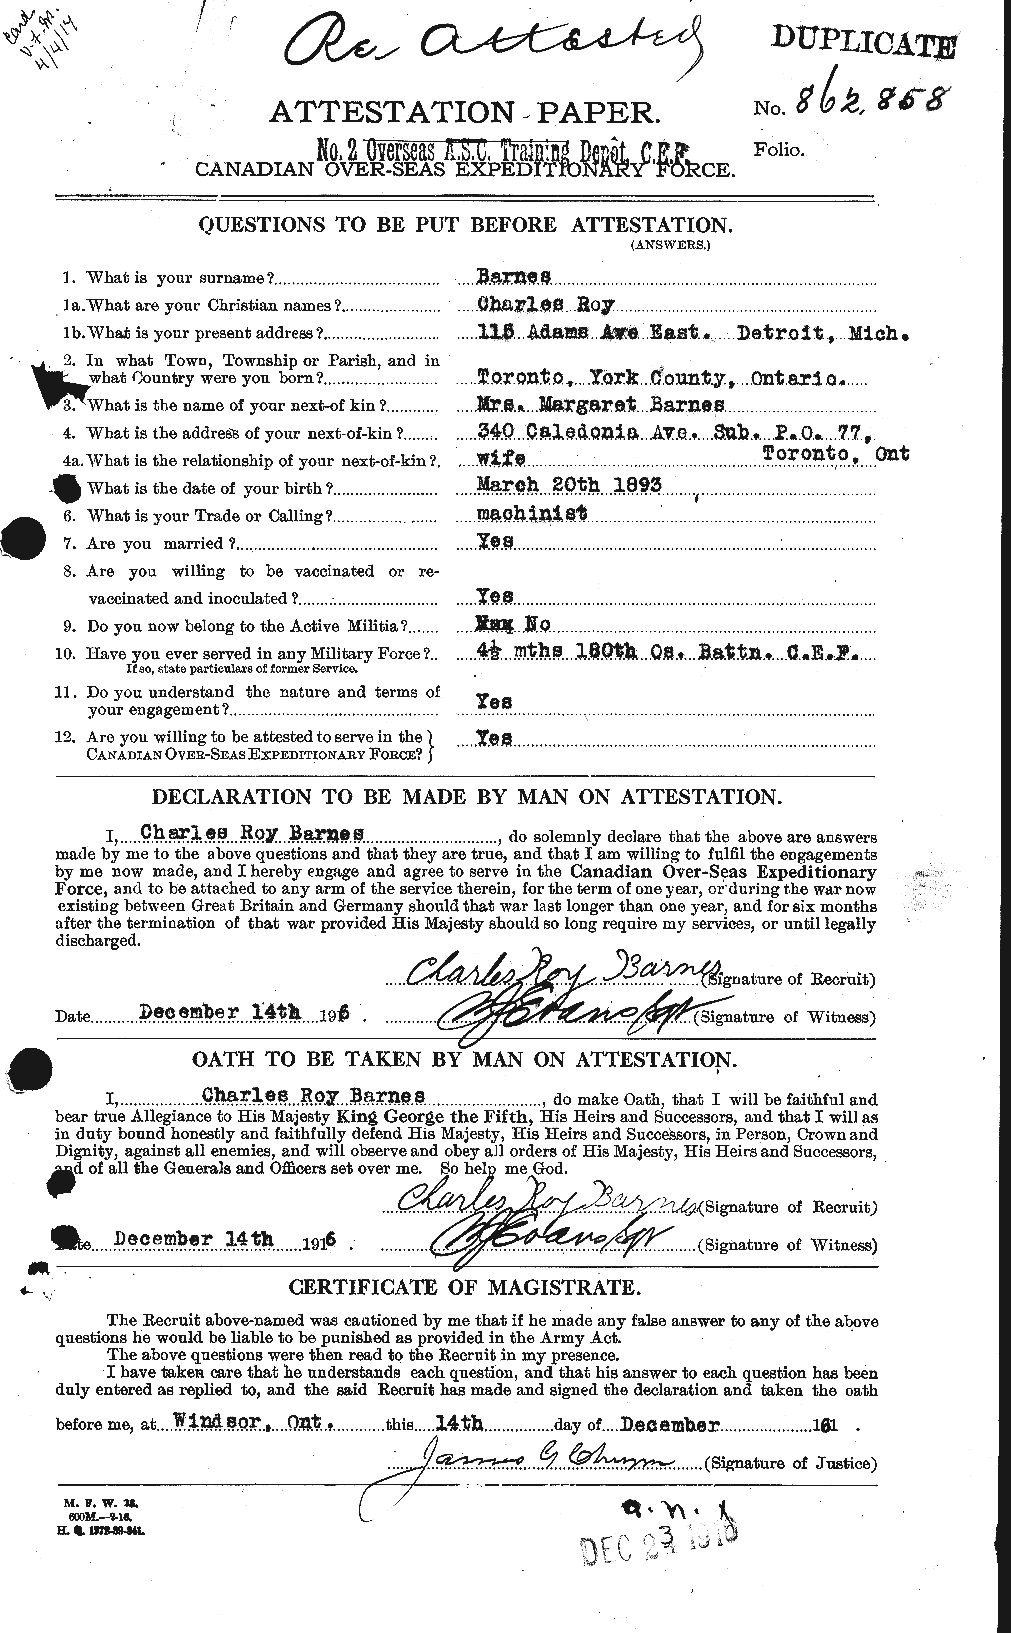 Personnel Records of the First World War - CEF 222619a